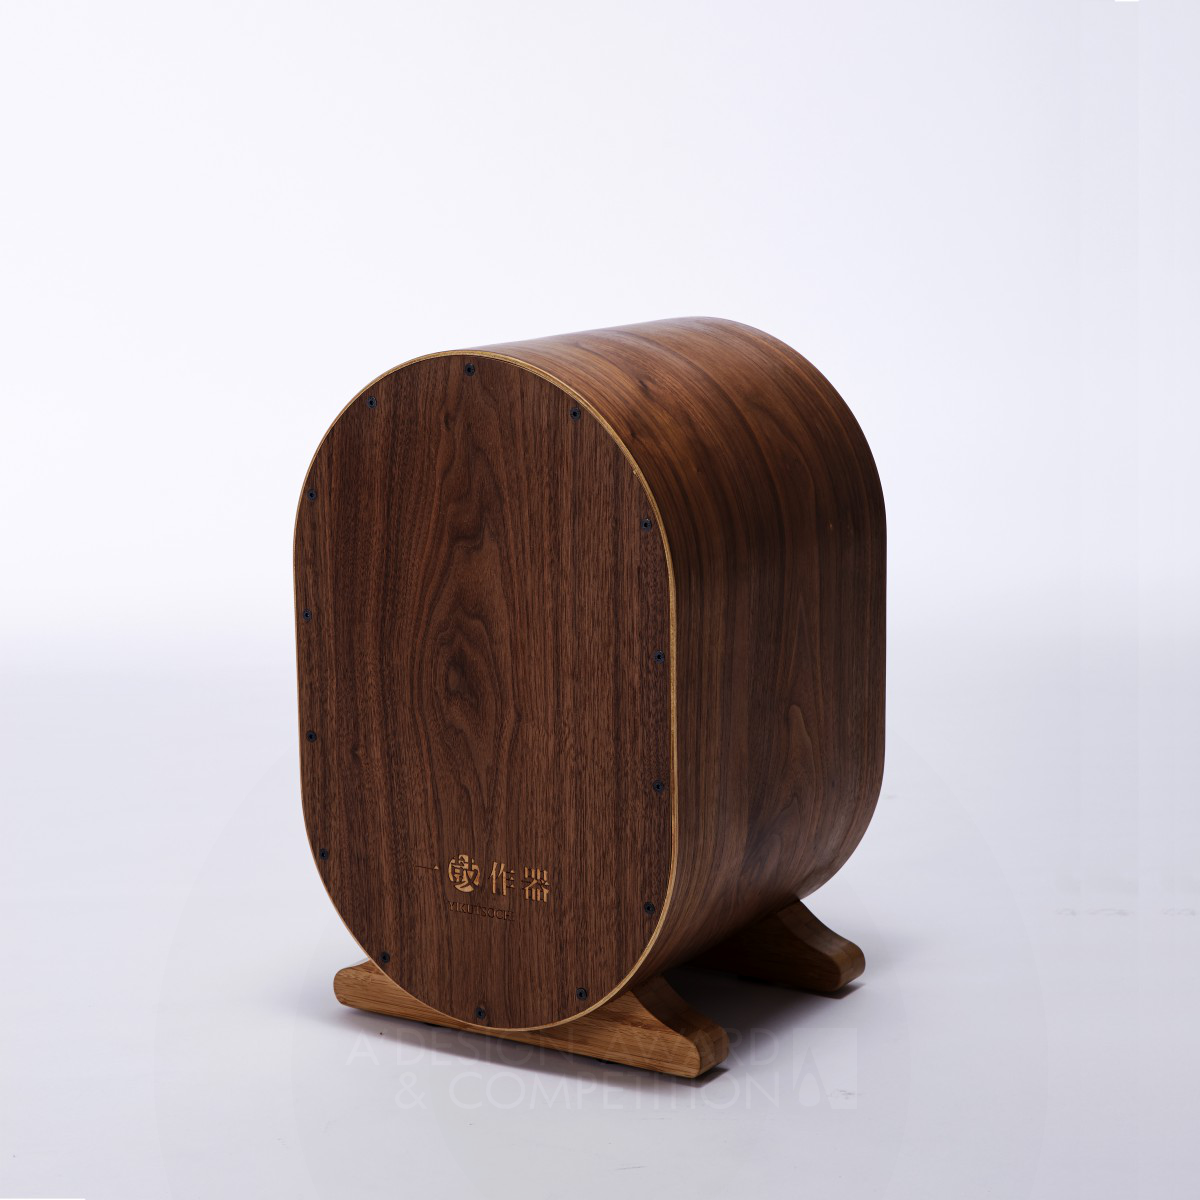 Bent Wood Cajon Traditional Craft Musical Instrument by HSU, Chung-Miao